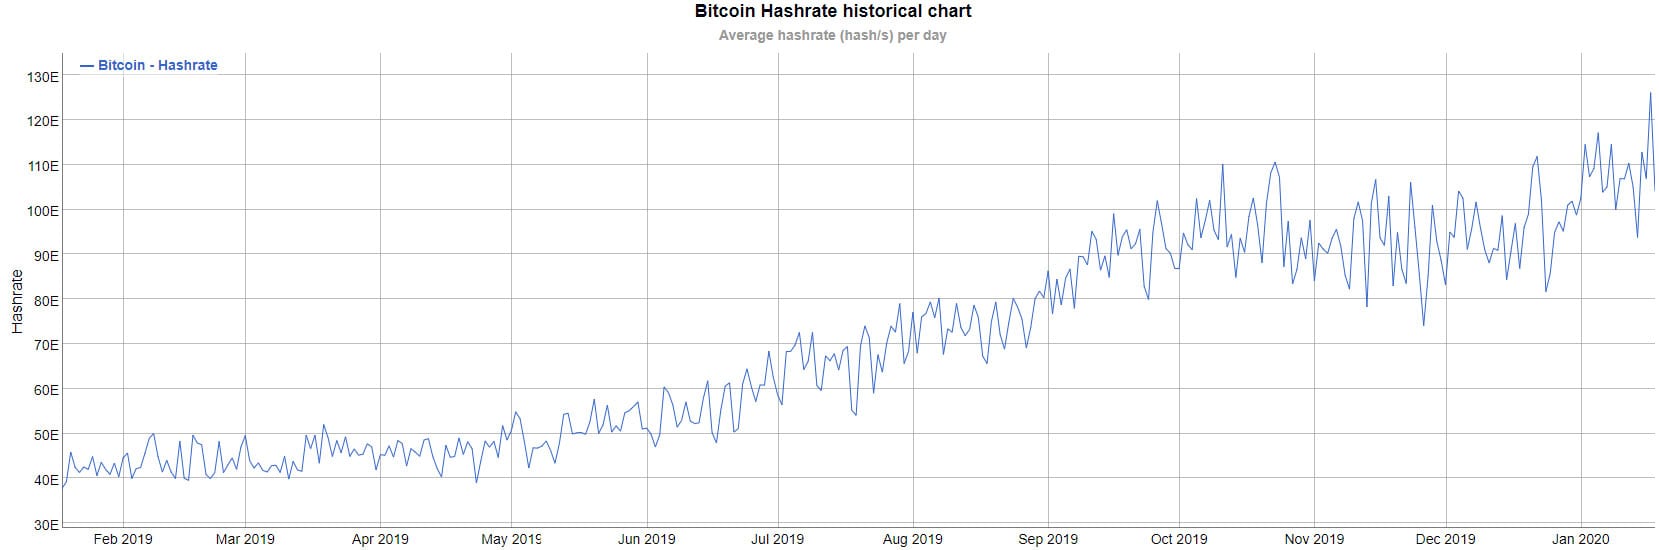 Bitcoins Hash Rate Hits A fresh All Time High Signifying A Strong Network Before Halving